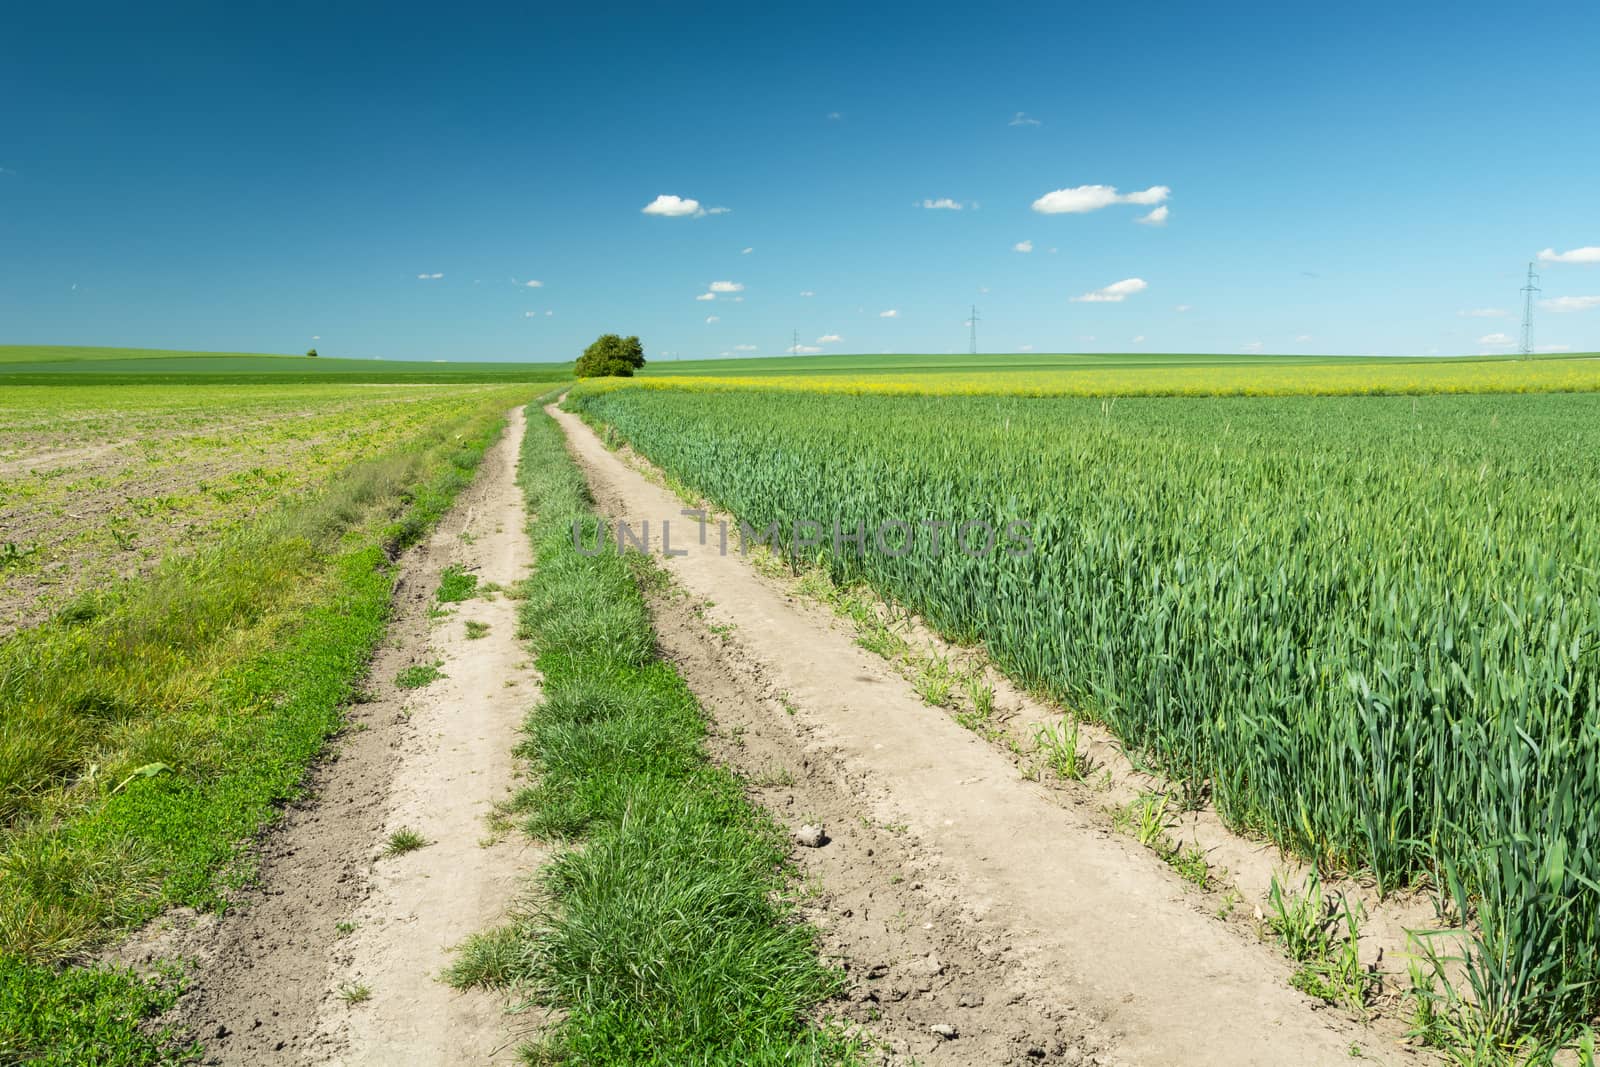 A long country road through fields with grain, horizon and blue sky, summer rural landscape